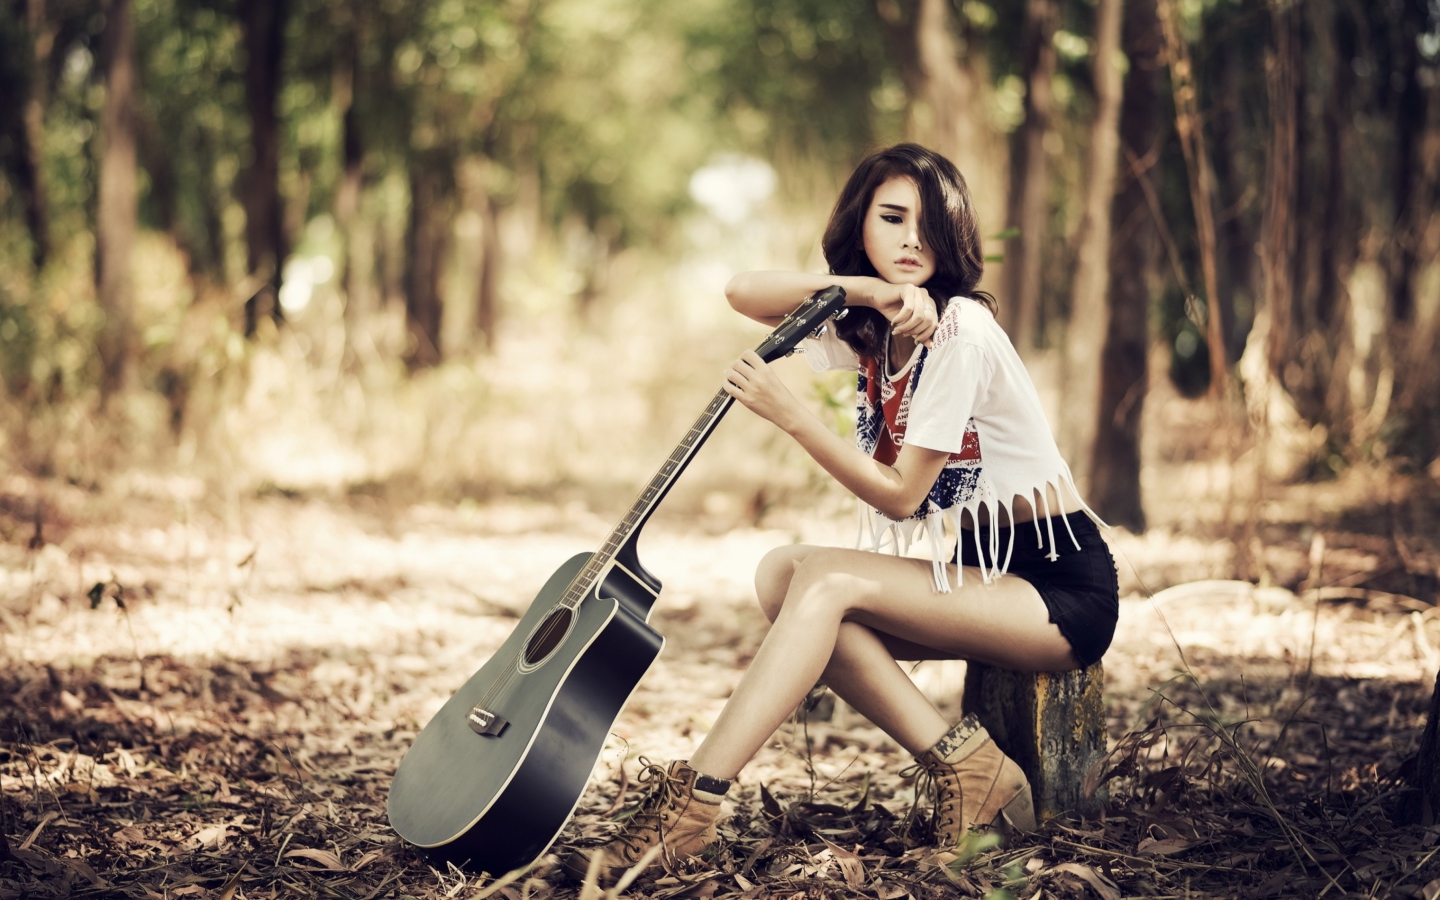 Обои Pretty Brunette Model With Guitar At Meadow 1440x900